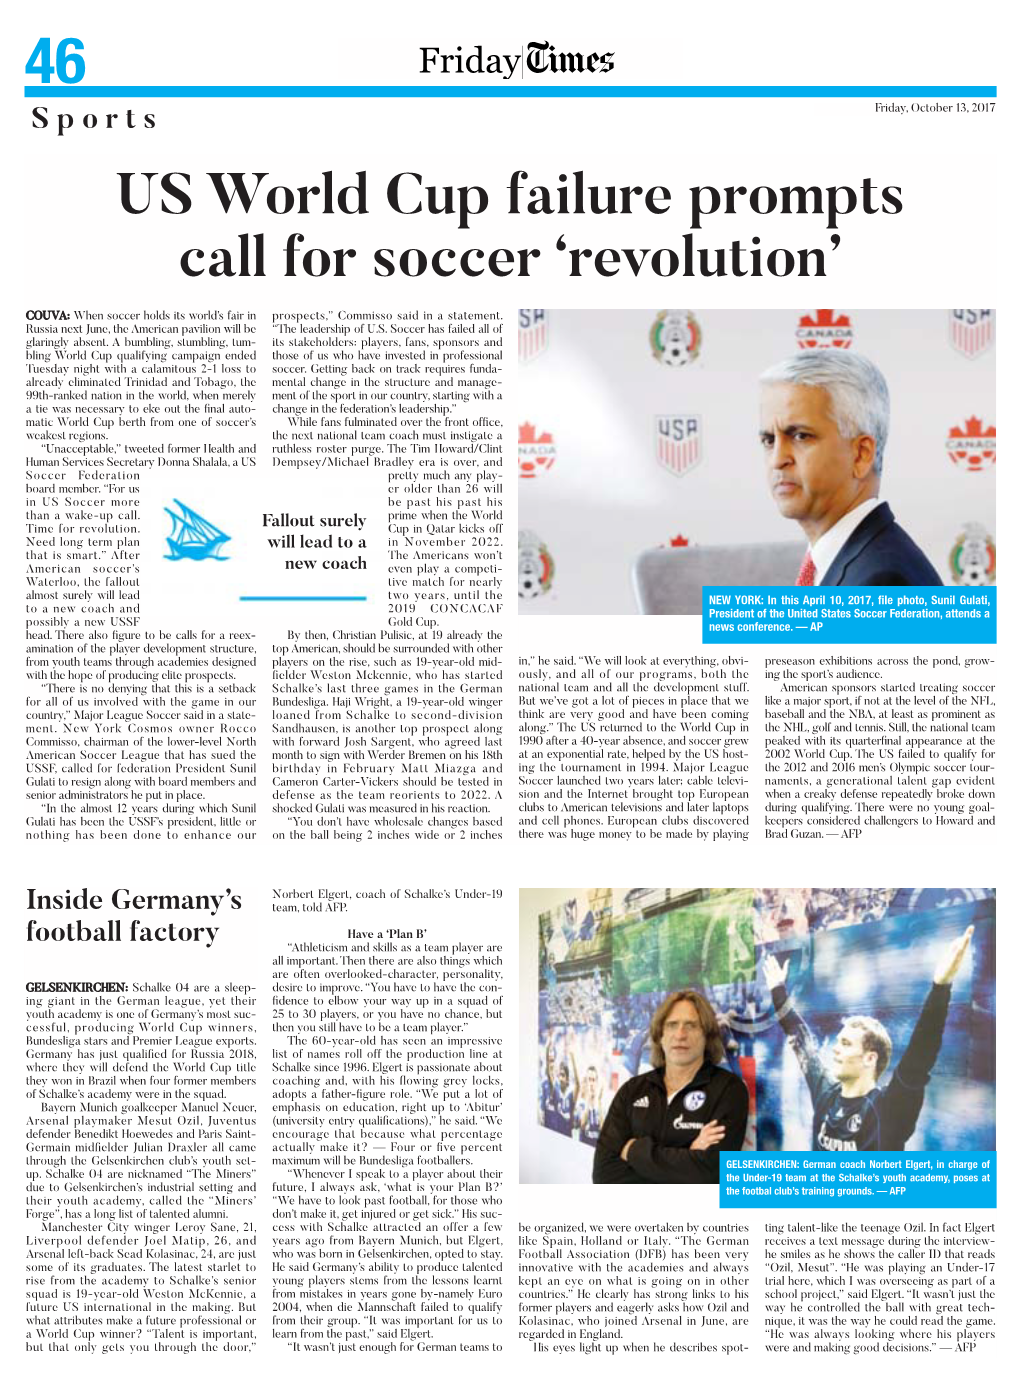 US World Cup Failure Prompts Call for Soccer 'Revolution'